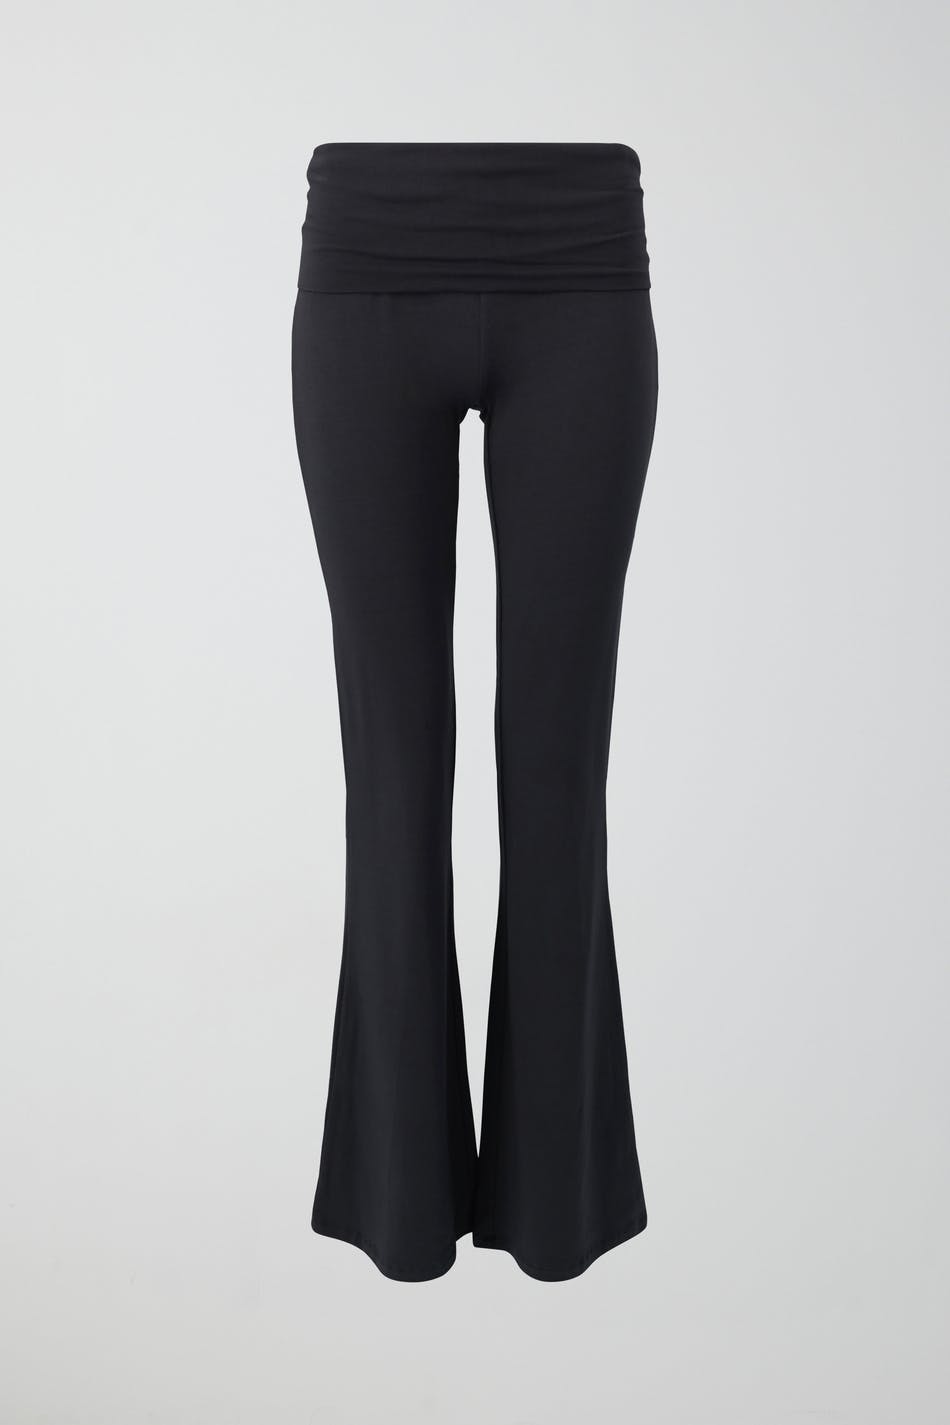 Gina Tricot - Soft touch tall folded flare trousers - yoga-pants - Black - S - Female